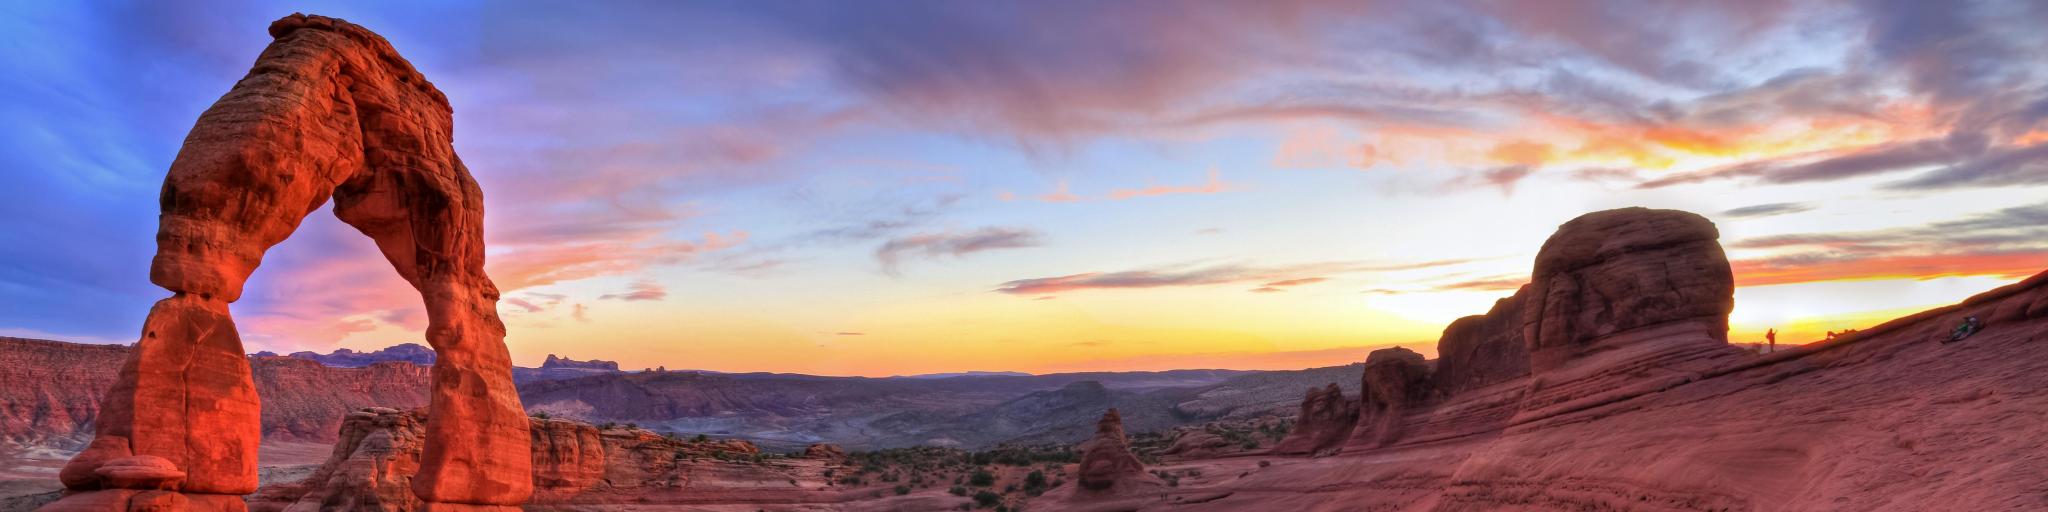 Panoramic view of the red rocks of Delicate Arch in Arches National Park in Moab, Utah